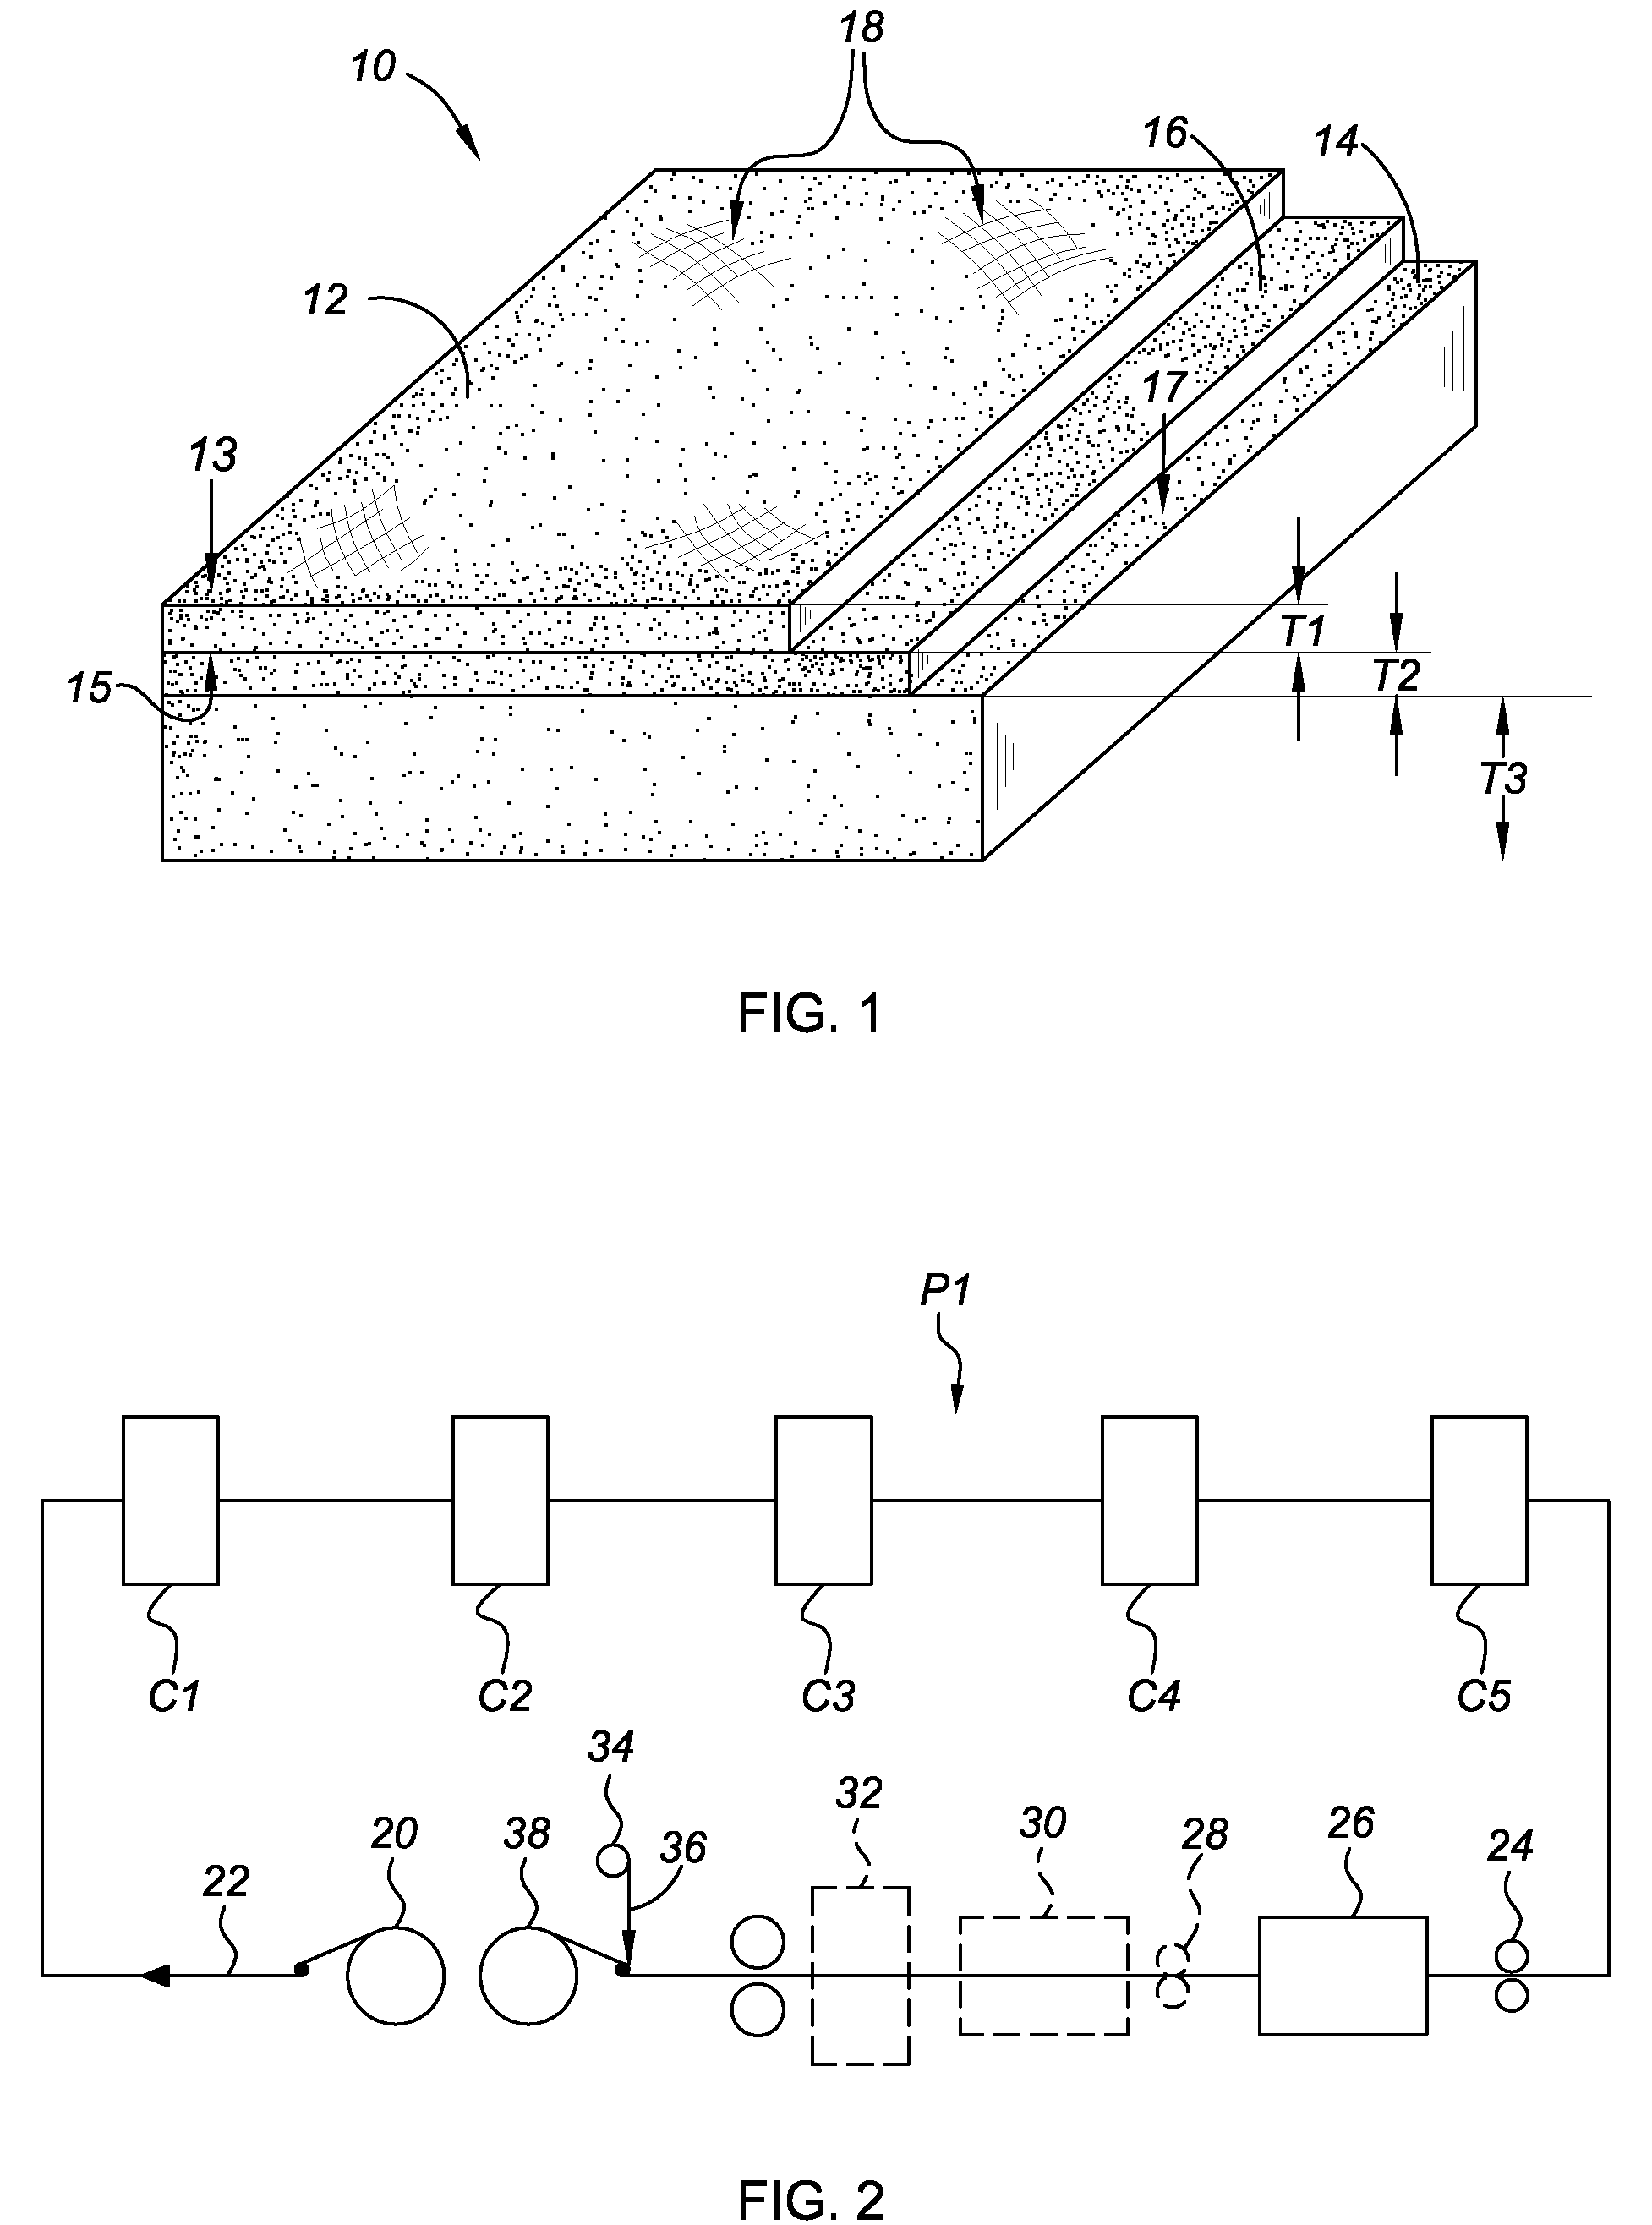 Bimetal laminate structure and method of making the same